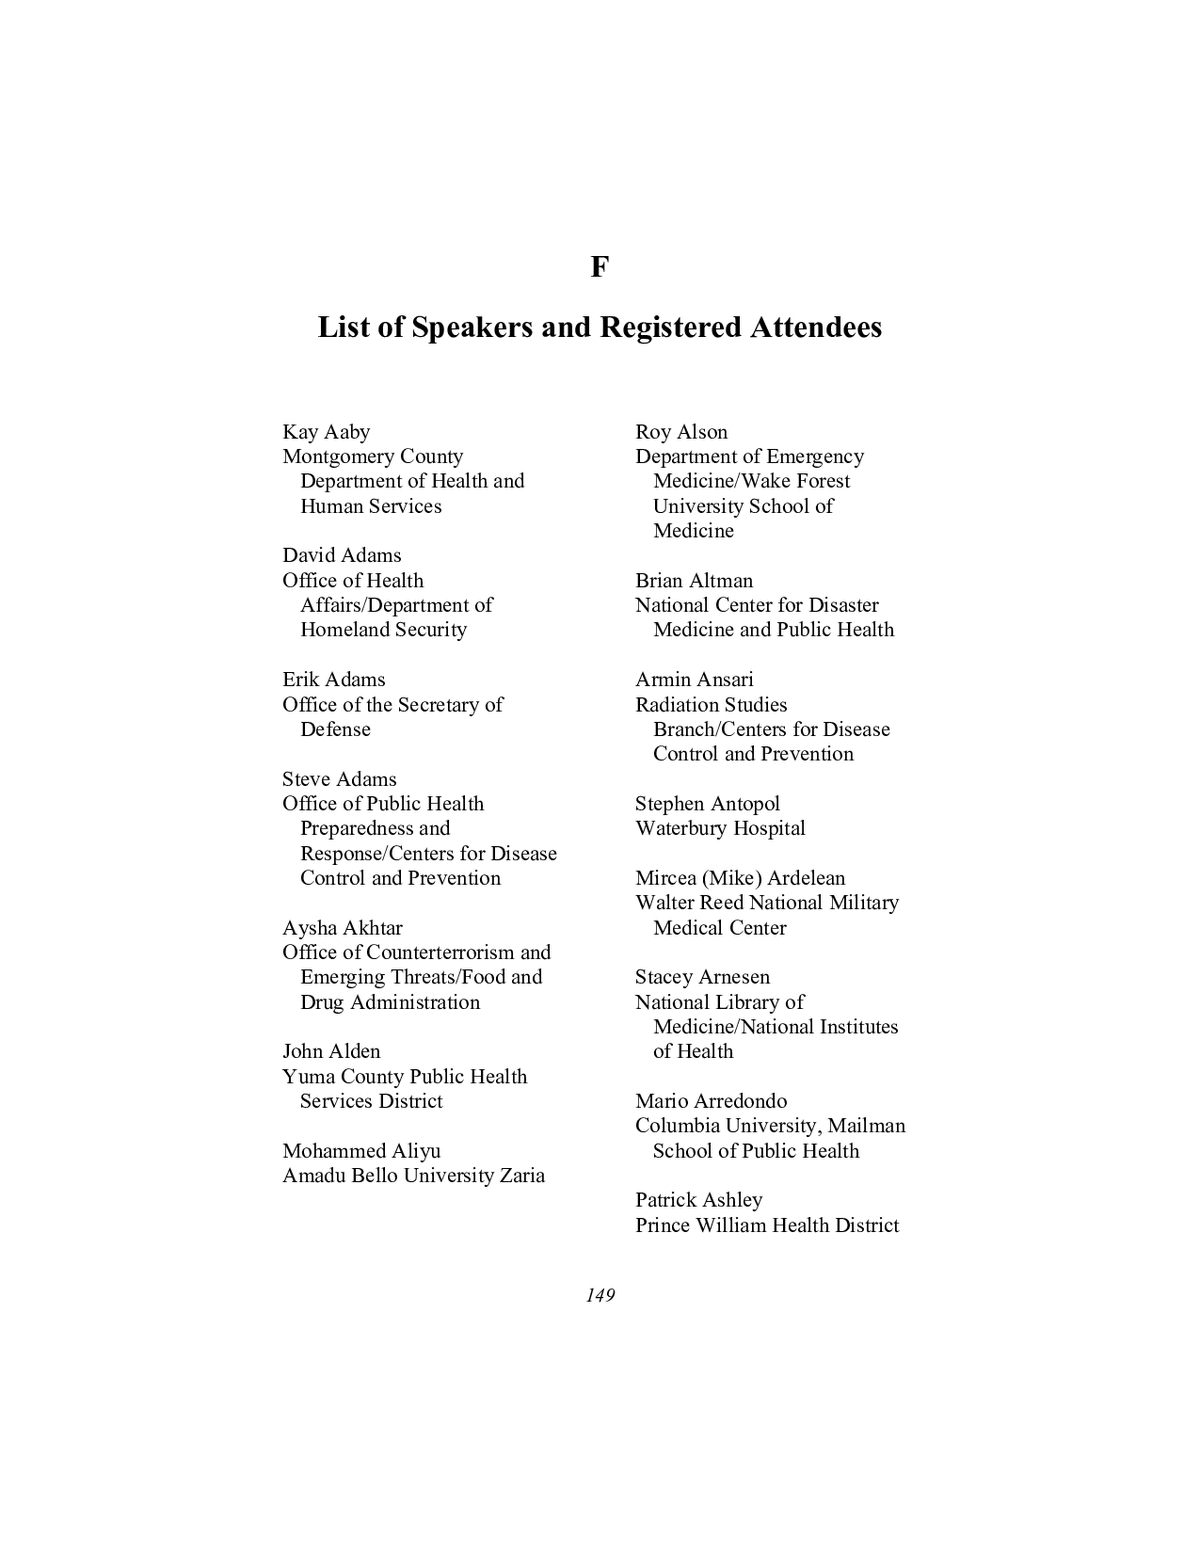 Appendix F: List of Speakers and Registered Attendees, Nationwide Response  Issues After an Improvised Nuclear Device Attack: Medical and Public Health  Considerations for Neighboring Jurisdictions: Workshop Summary